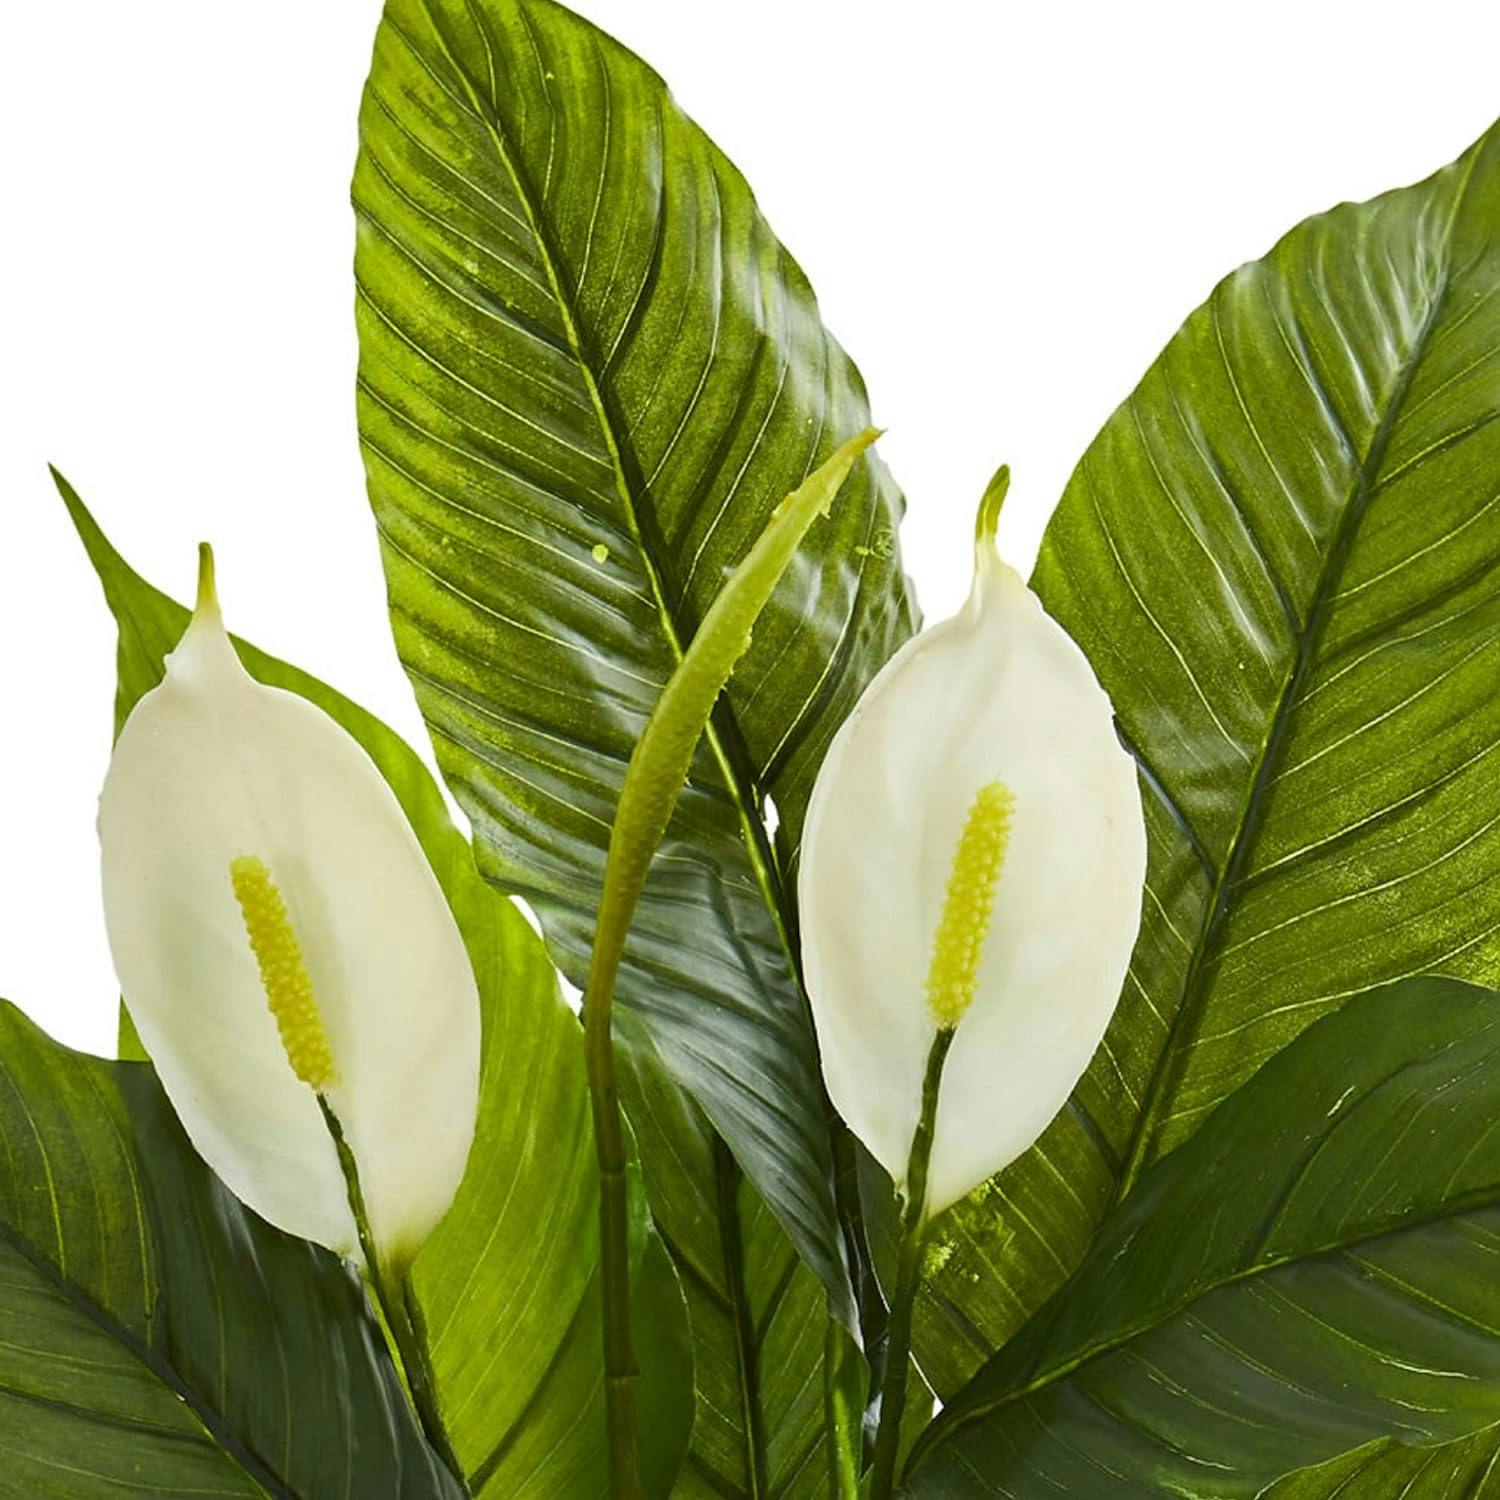 Elegant Greenery 30" Spathiphyllum Potted Artificial Plant